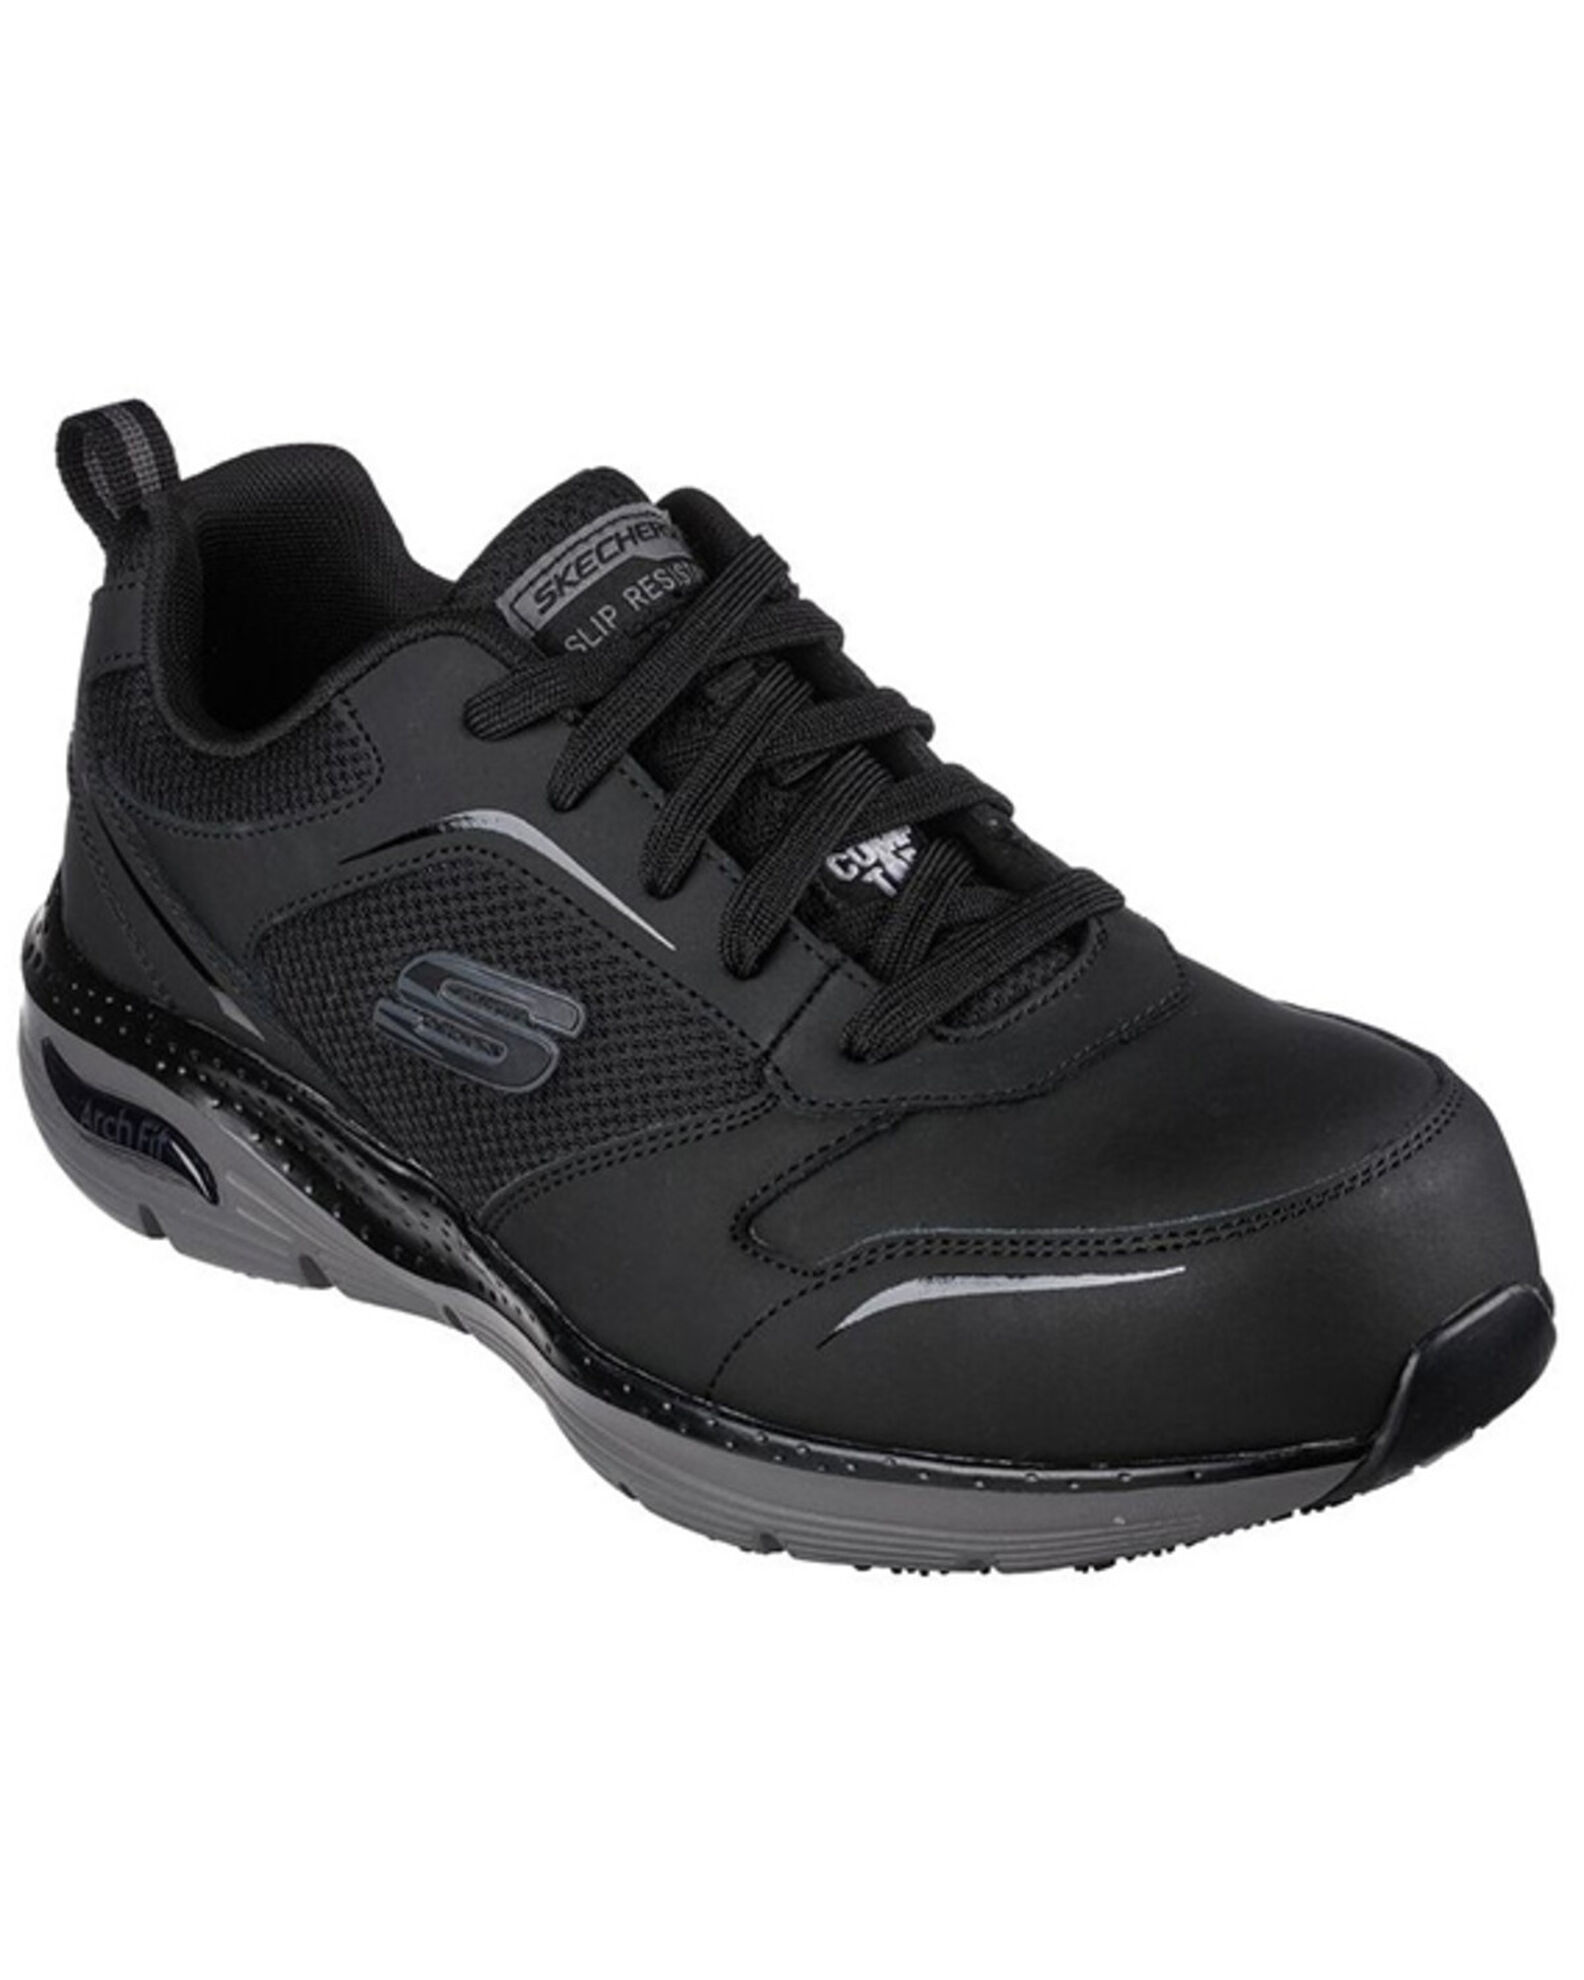 Product Name: Skechers Men's Arch Fit Lace-Up Athletic Work Shoe ...